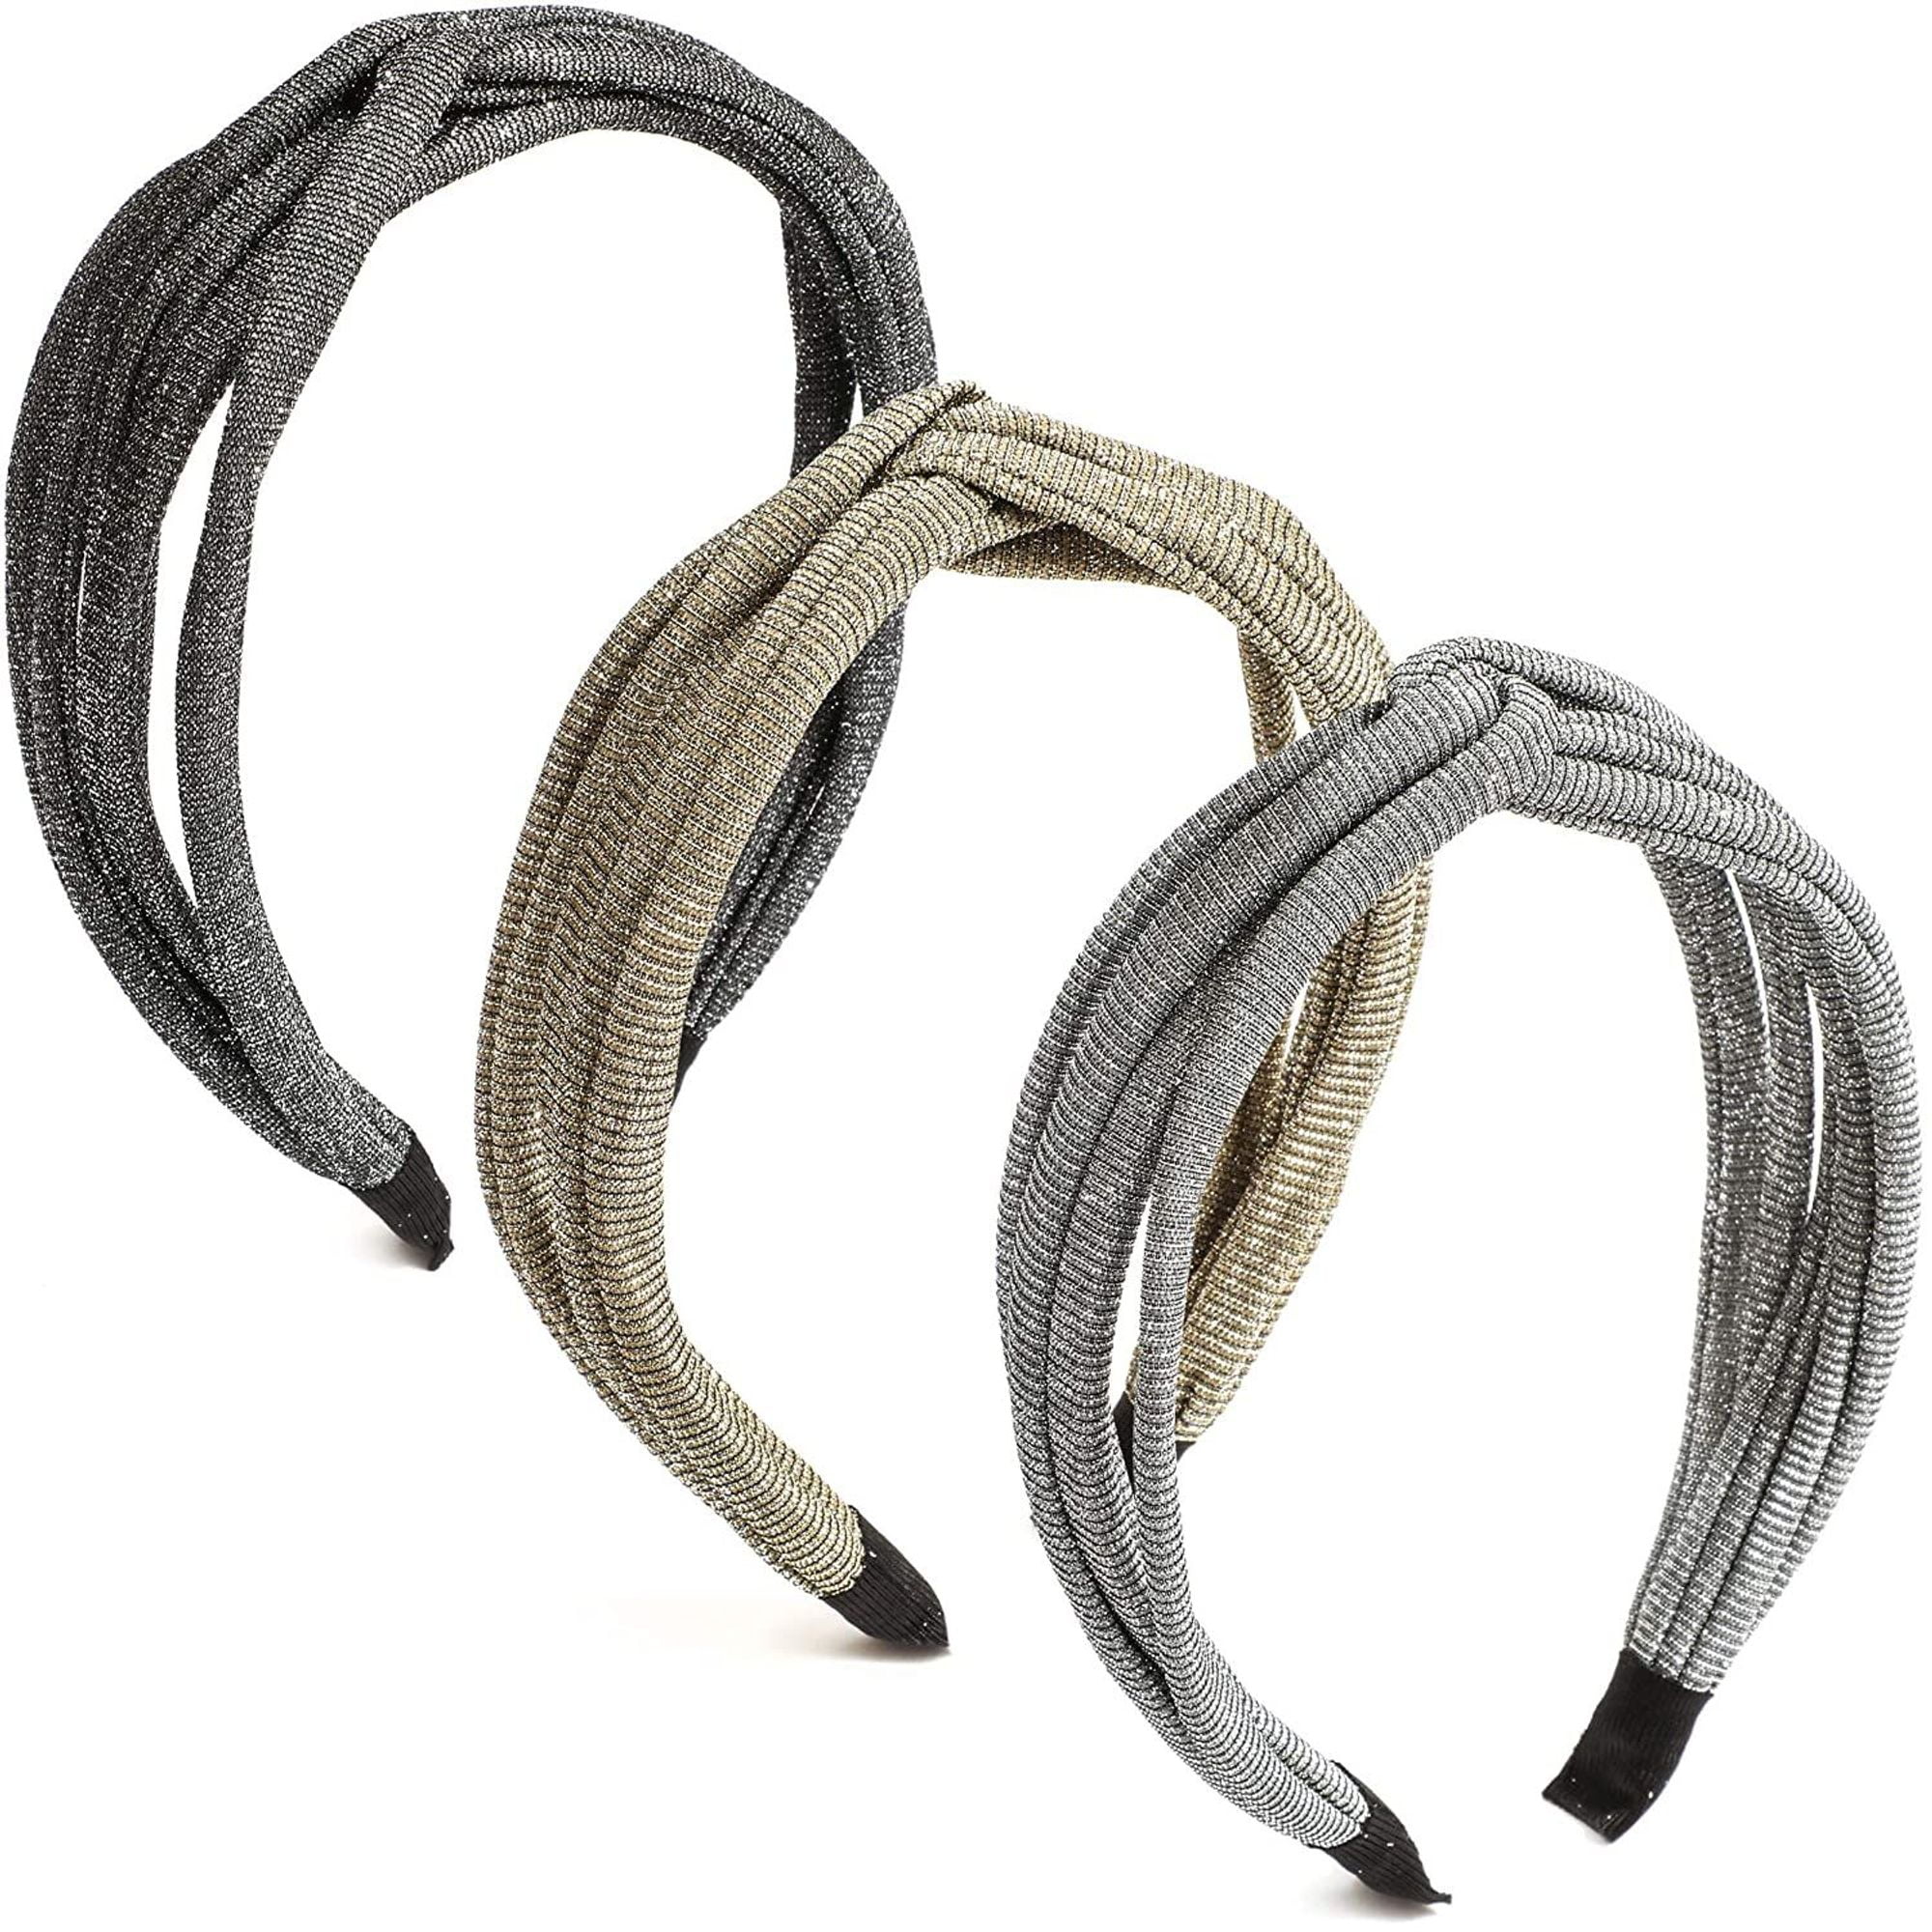 Glamlily - 3-Pack Women's Top Knotted Headband, Glitter Fabric Wrapped ...